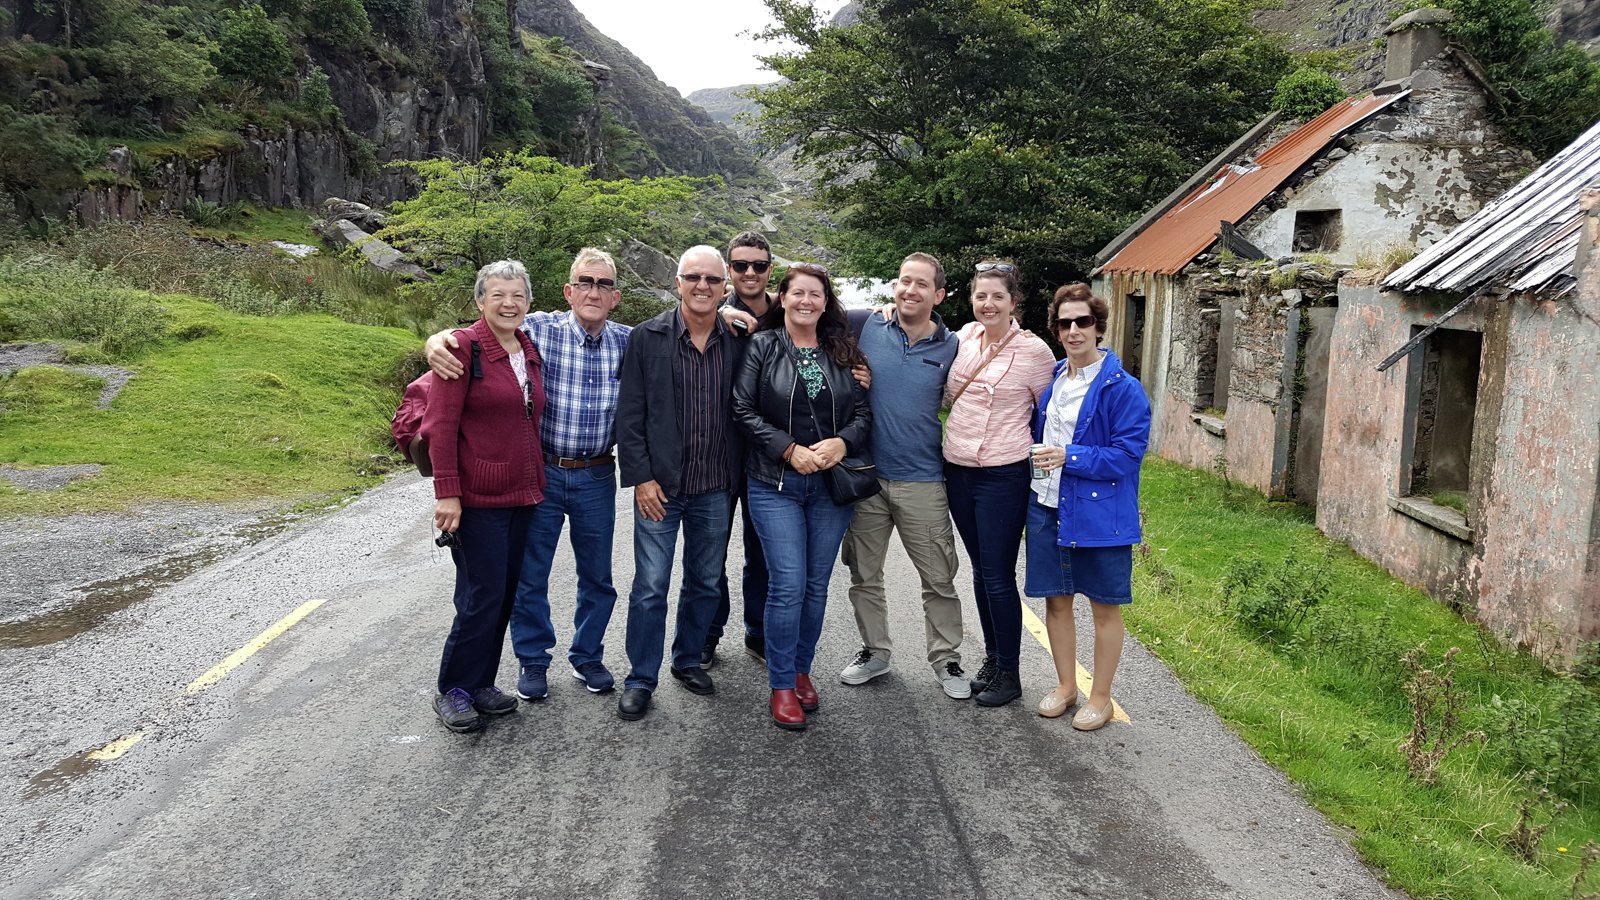 Family trip a few days after Colm and Geri’s wedding, Gap of Dunloe, October 2016.